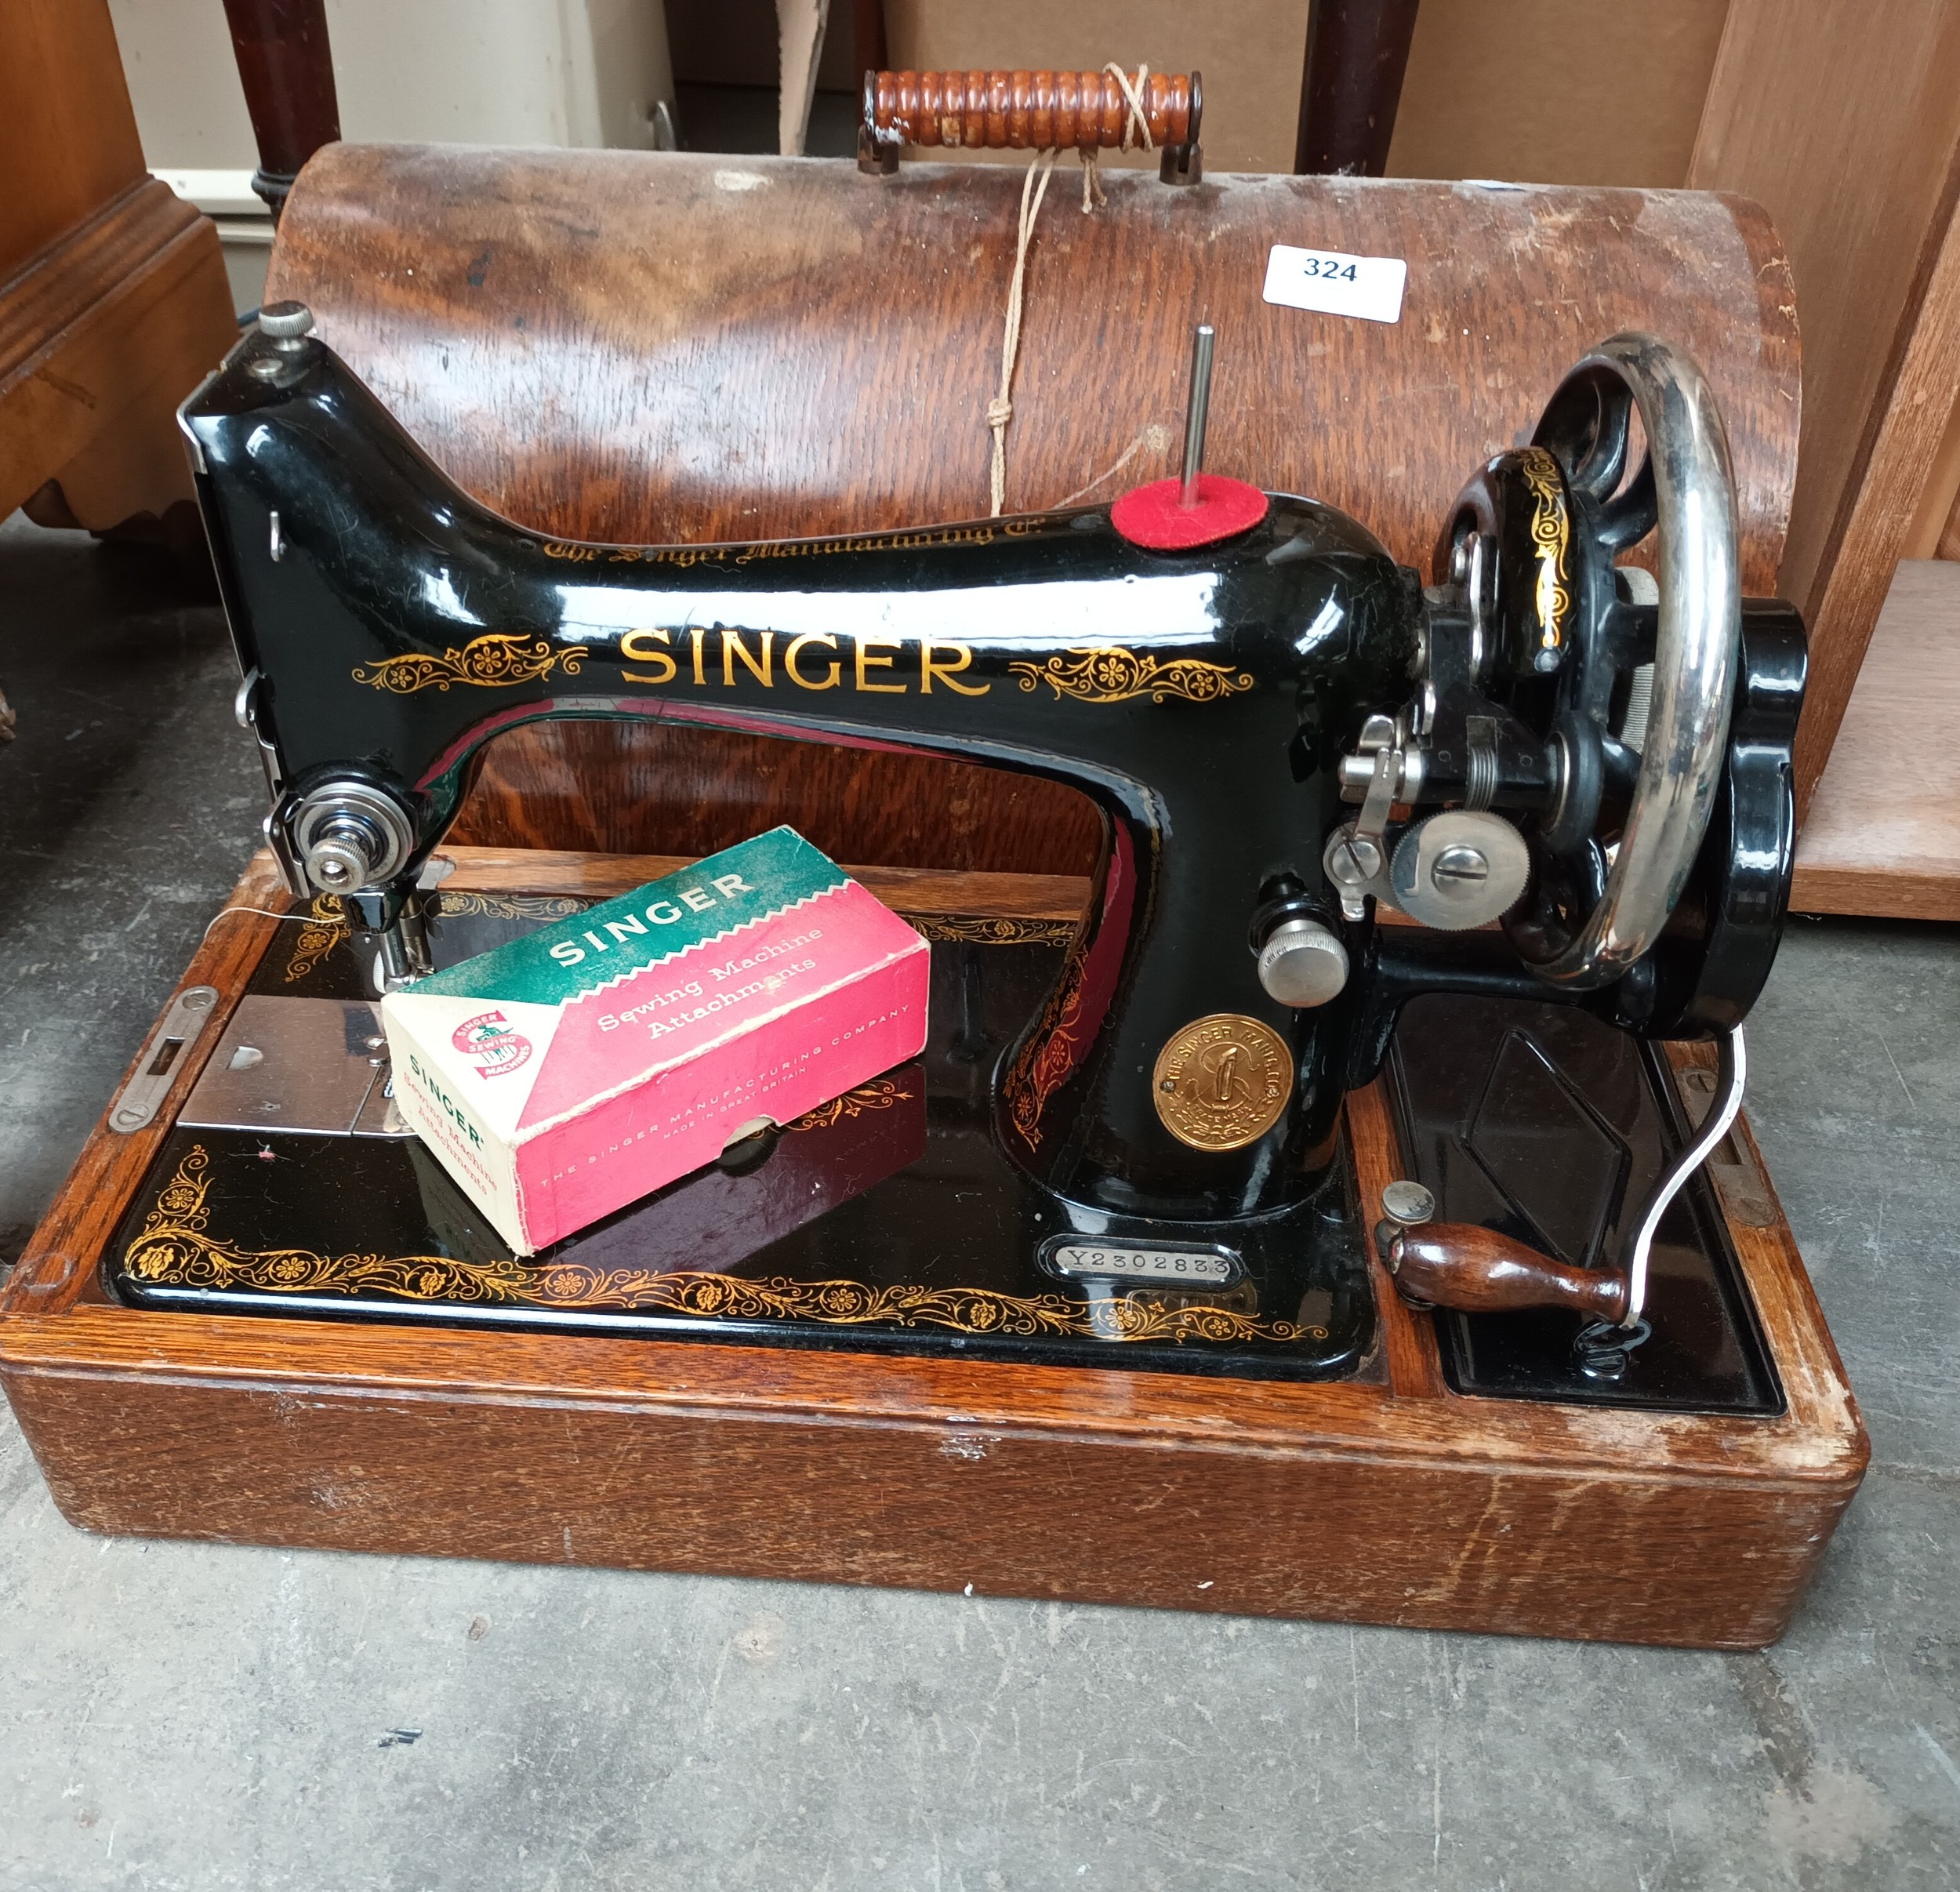 Singer Sewing machine within fitted case